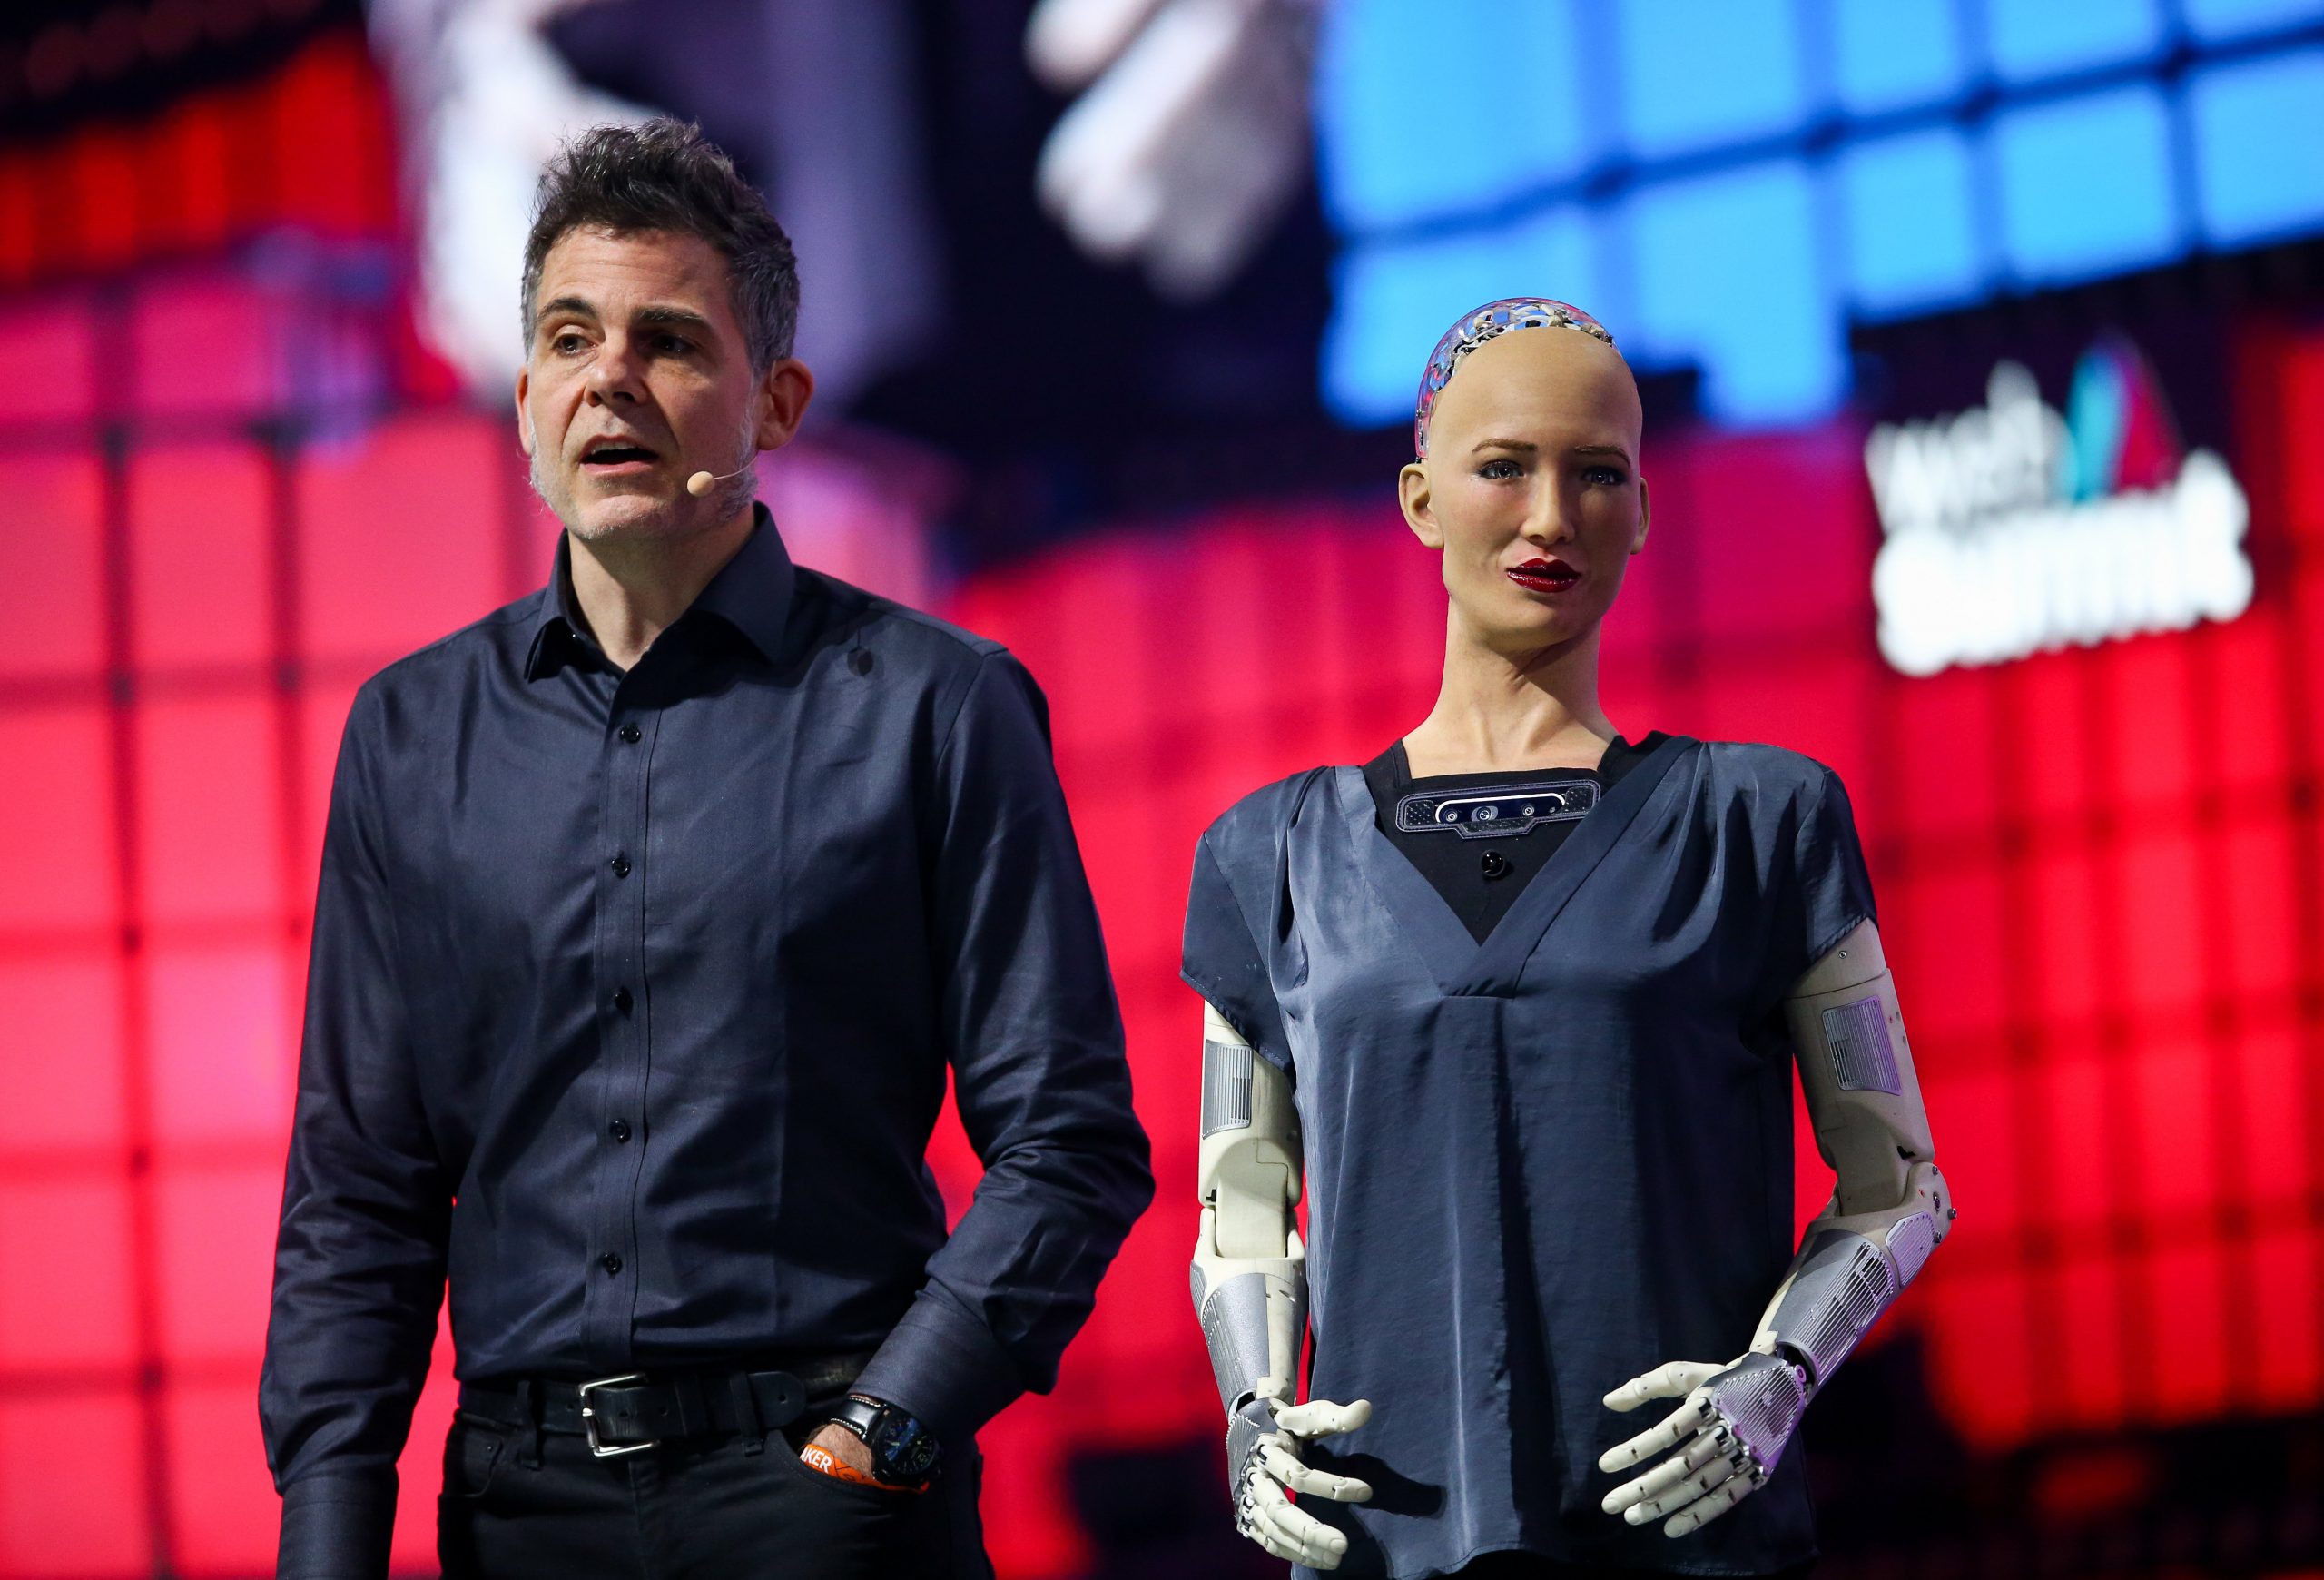 6 November 2019; Sophia The Robot, Robot, Hanson Robotics, right, and David Hanson, Founder, Hanson Robotics Ltd.,
 on Centre Stage during day two of Web Summit 2019 at the Altice Arena in Lisbon, Portugal. Photo by Vaughn Ridley/Web Summit via Sportsfile